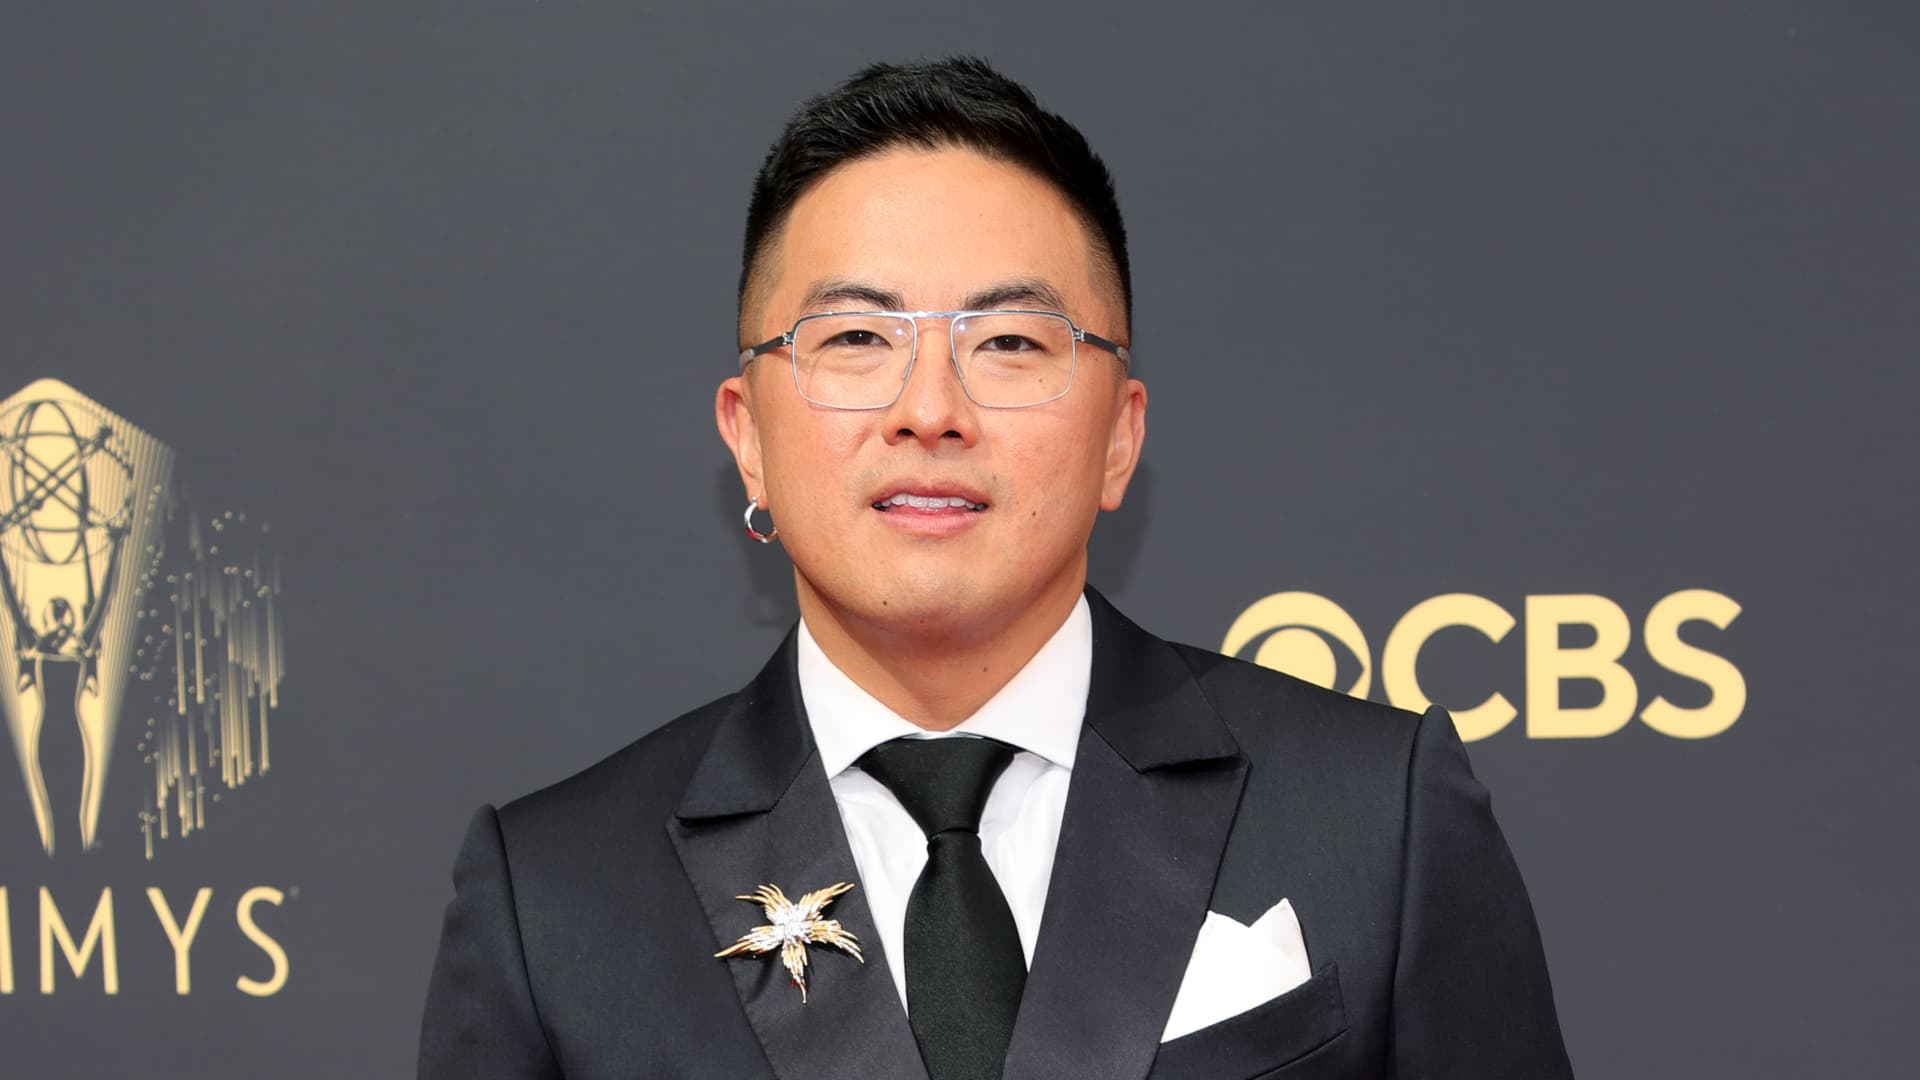 Bowen Yang attends the 73rd Primetime Emmy Awards at L.A. LIVE on September 19, 2021 in Los Angeles, California.